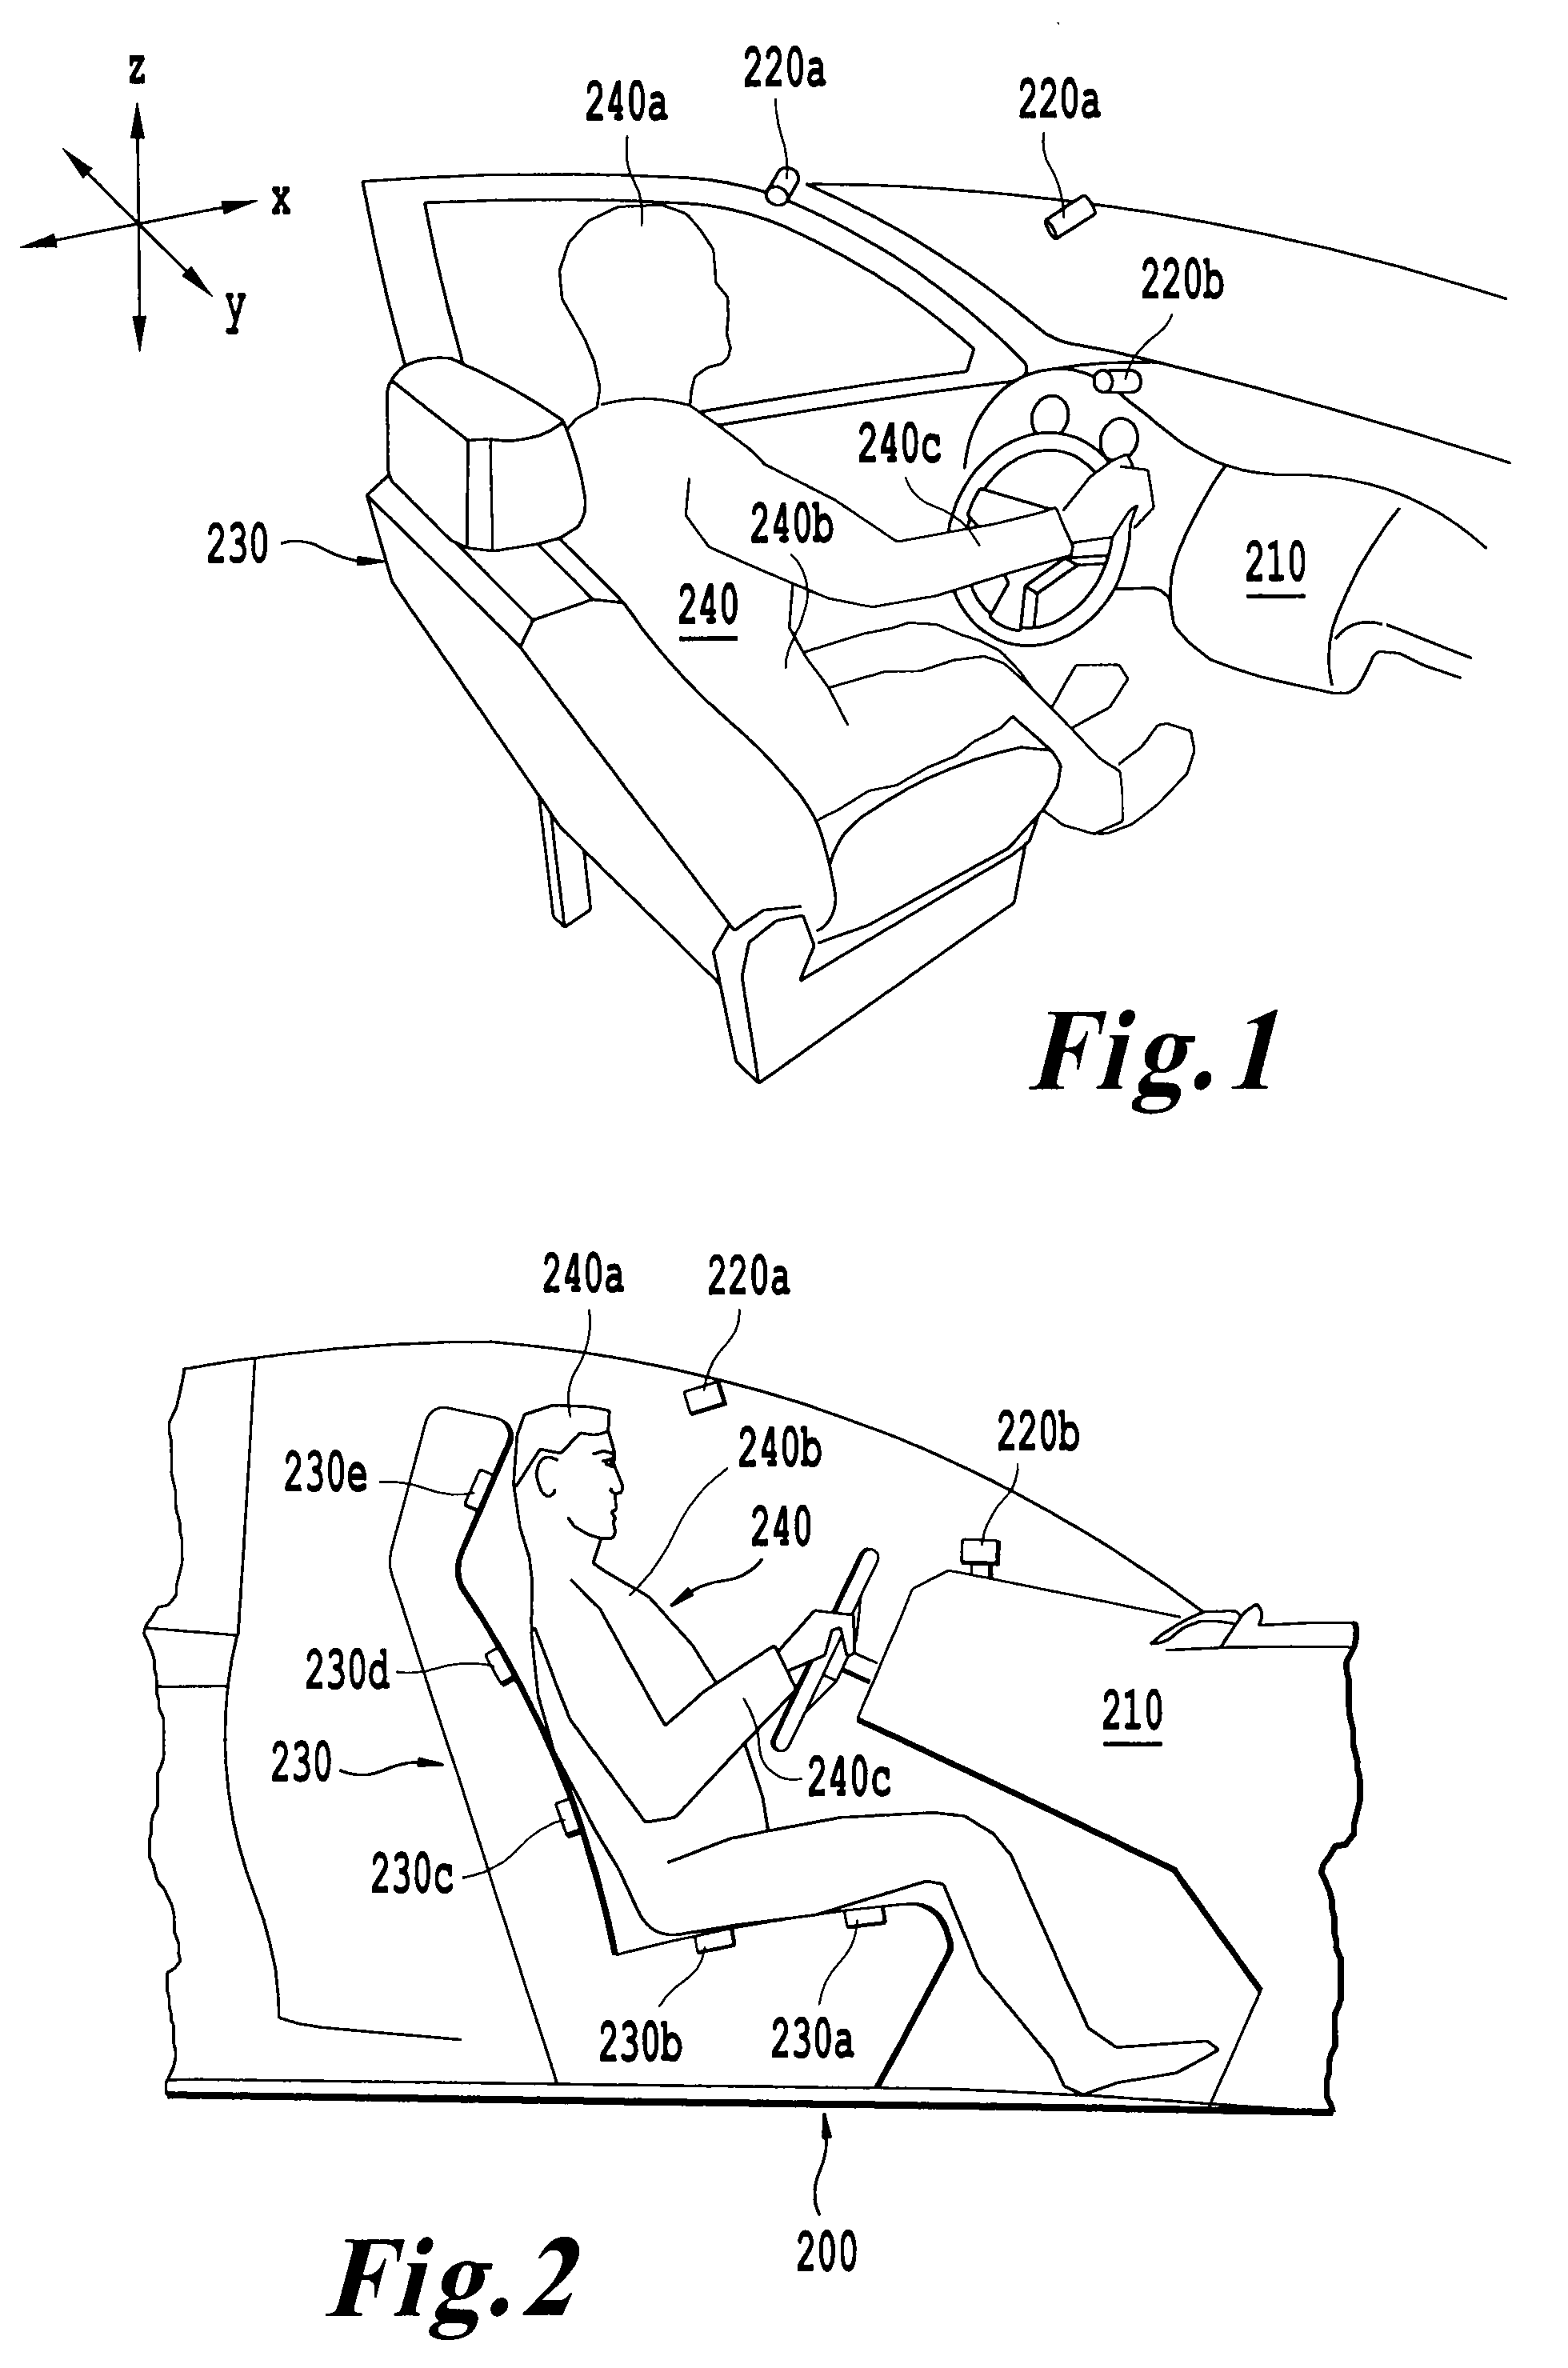 System, apparatus and associated methodology for interactively monitoring and reducing driver drowsiness